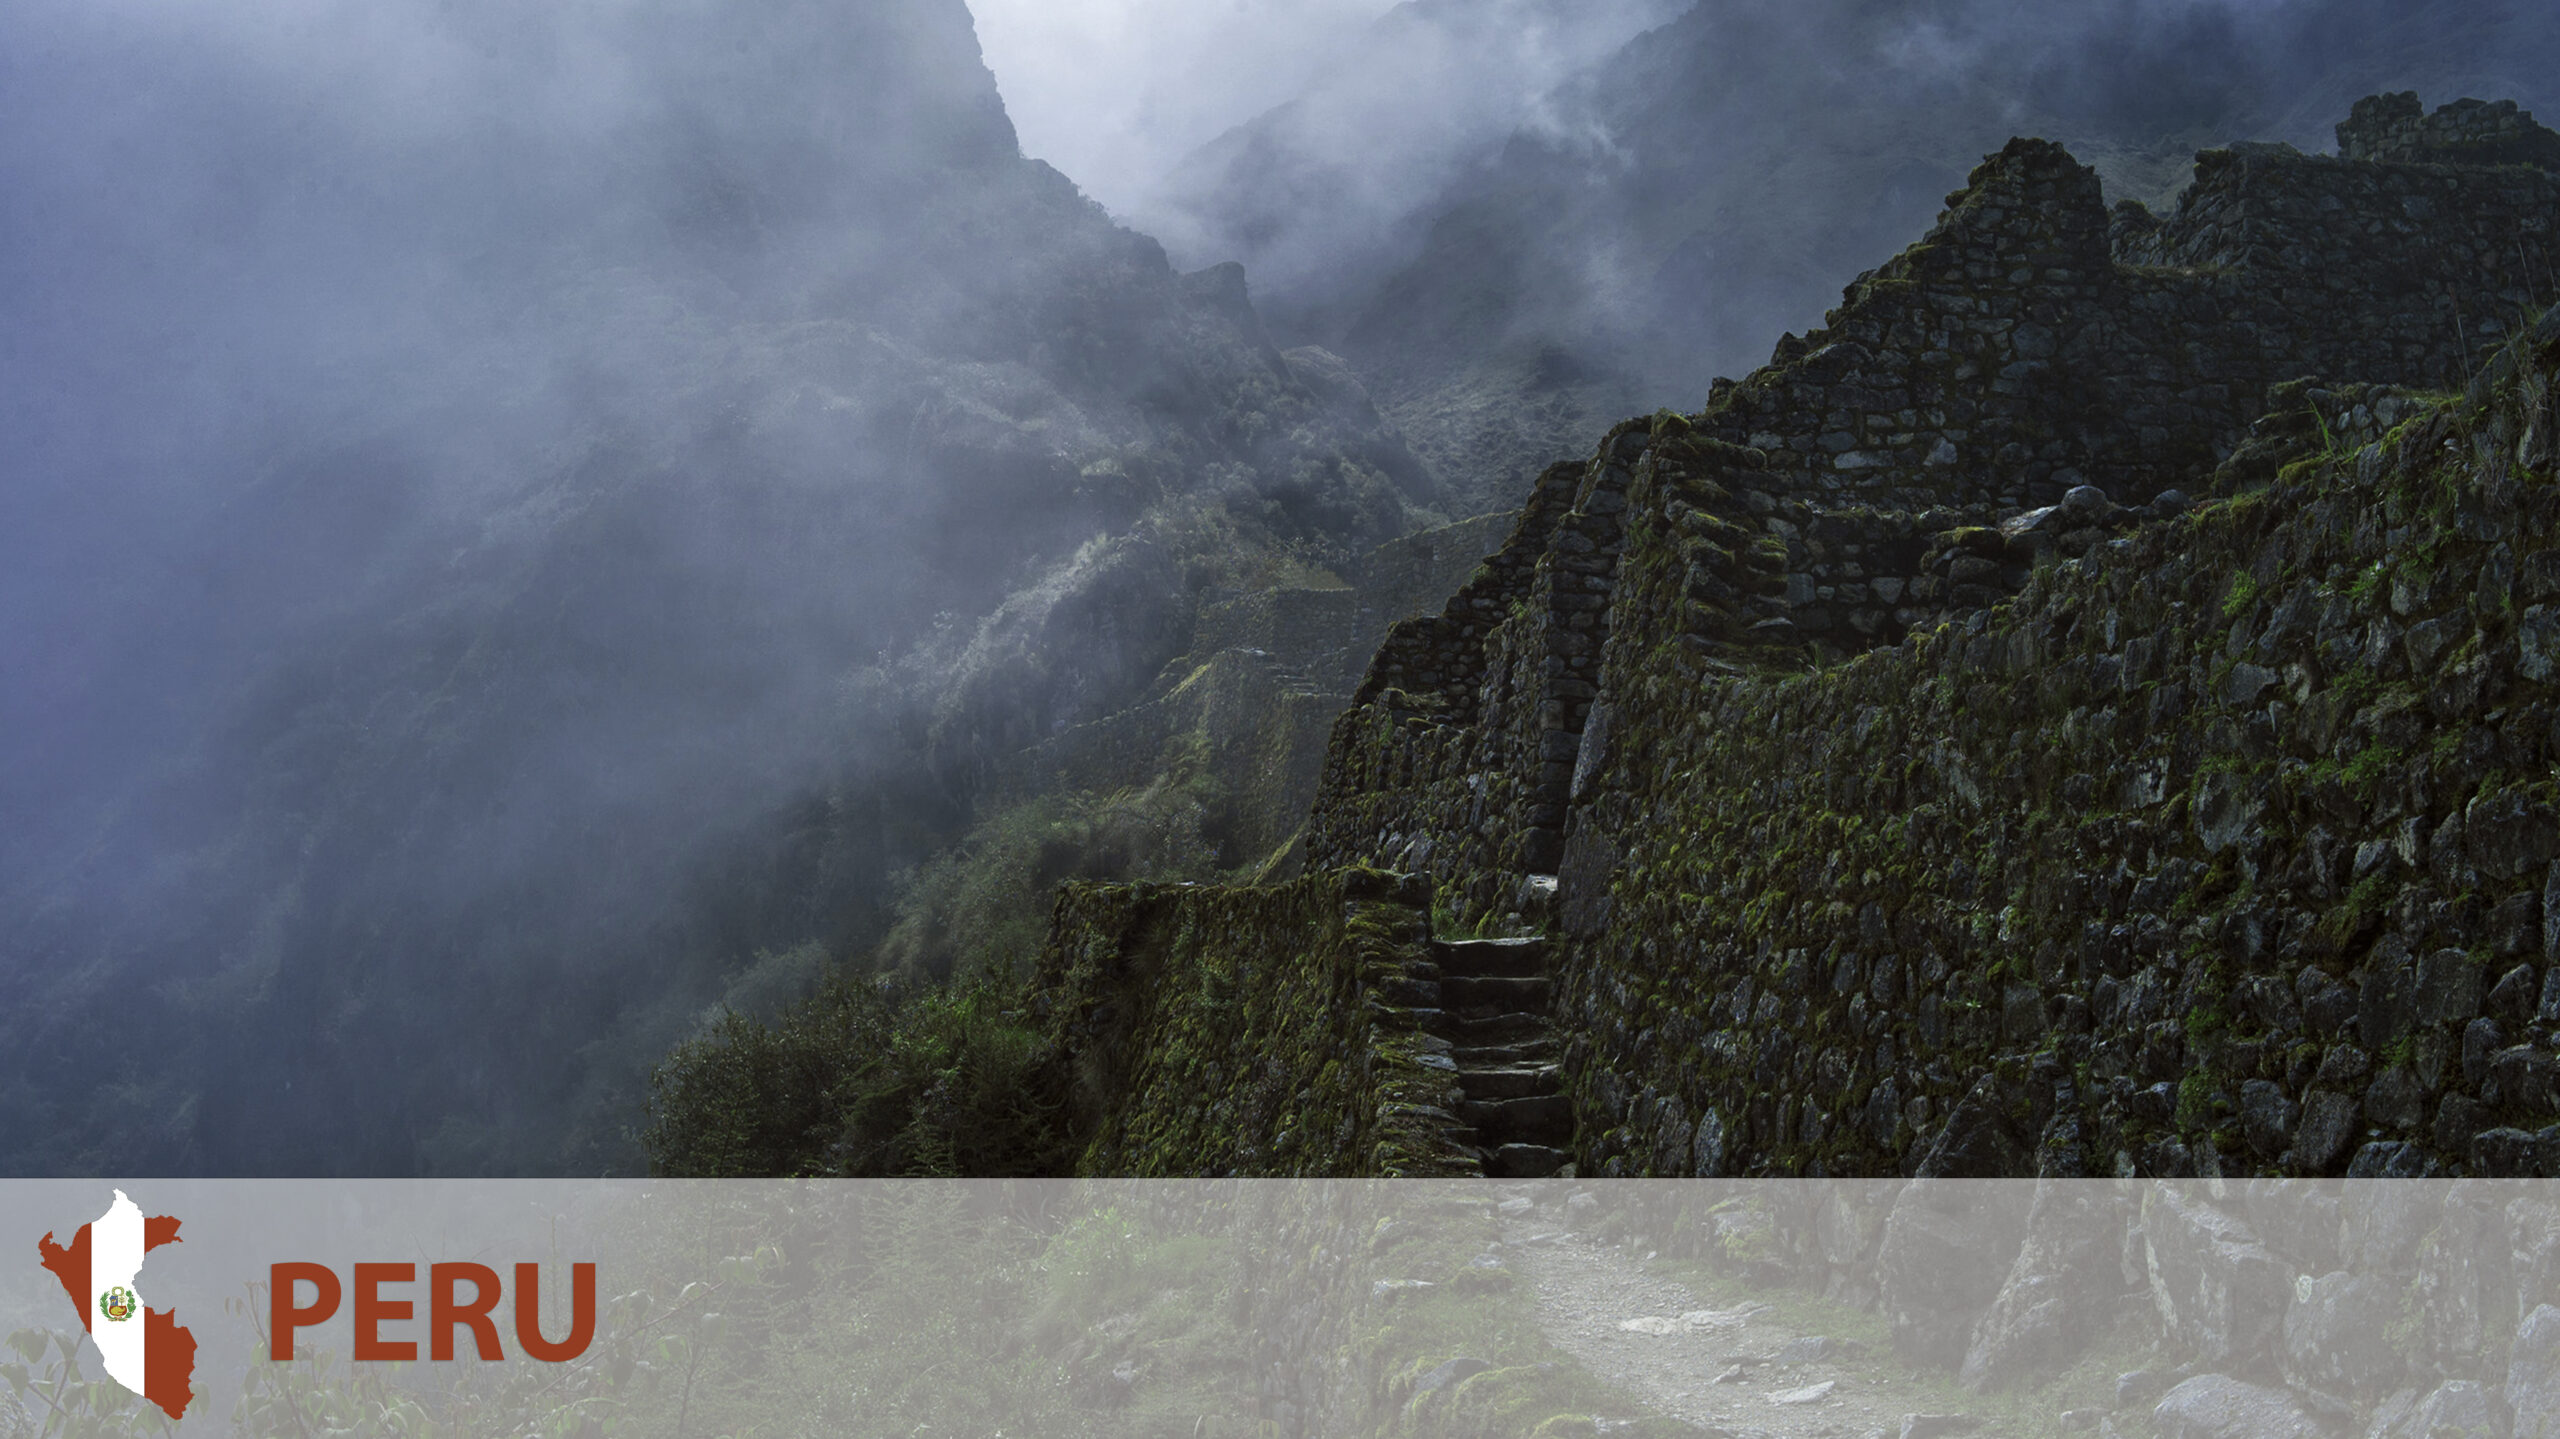 Featured image for “Peru”